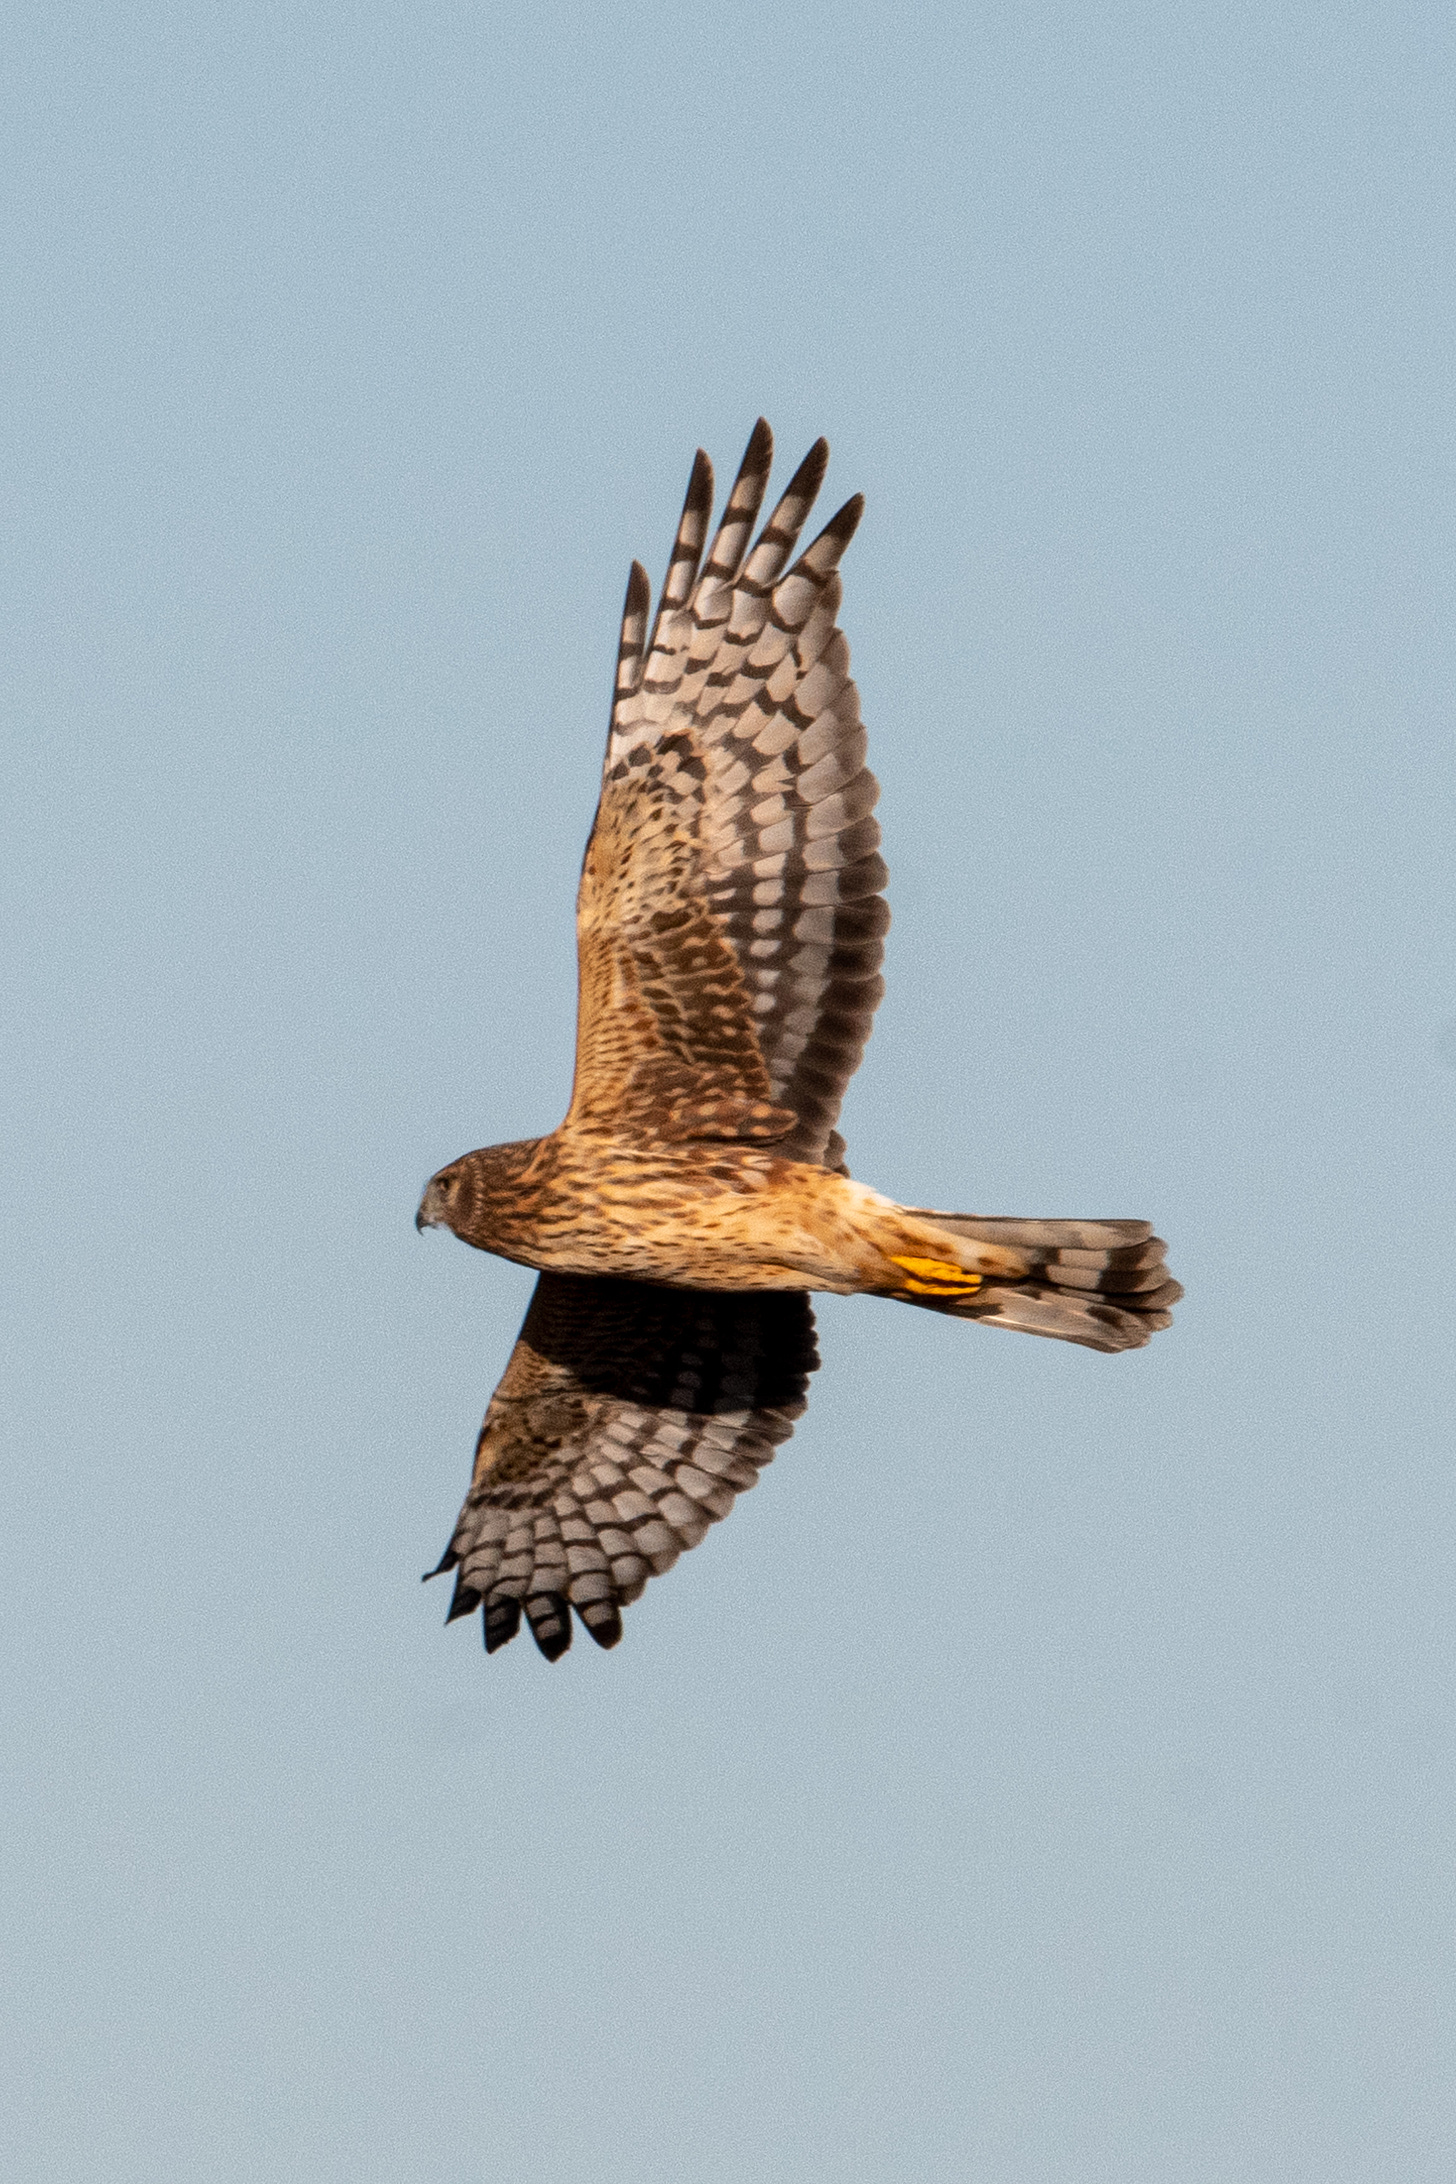 A Northern harrier, with its distinctive kitchen-timer-shaped head, seen from below as it glides overhead, wings outstretched